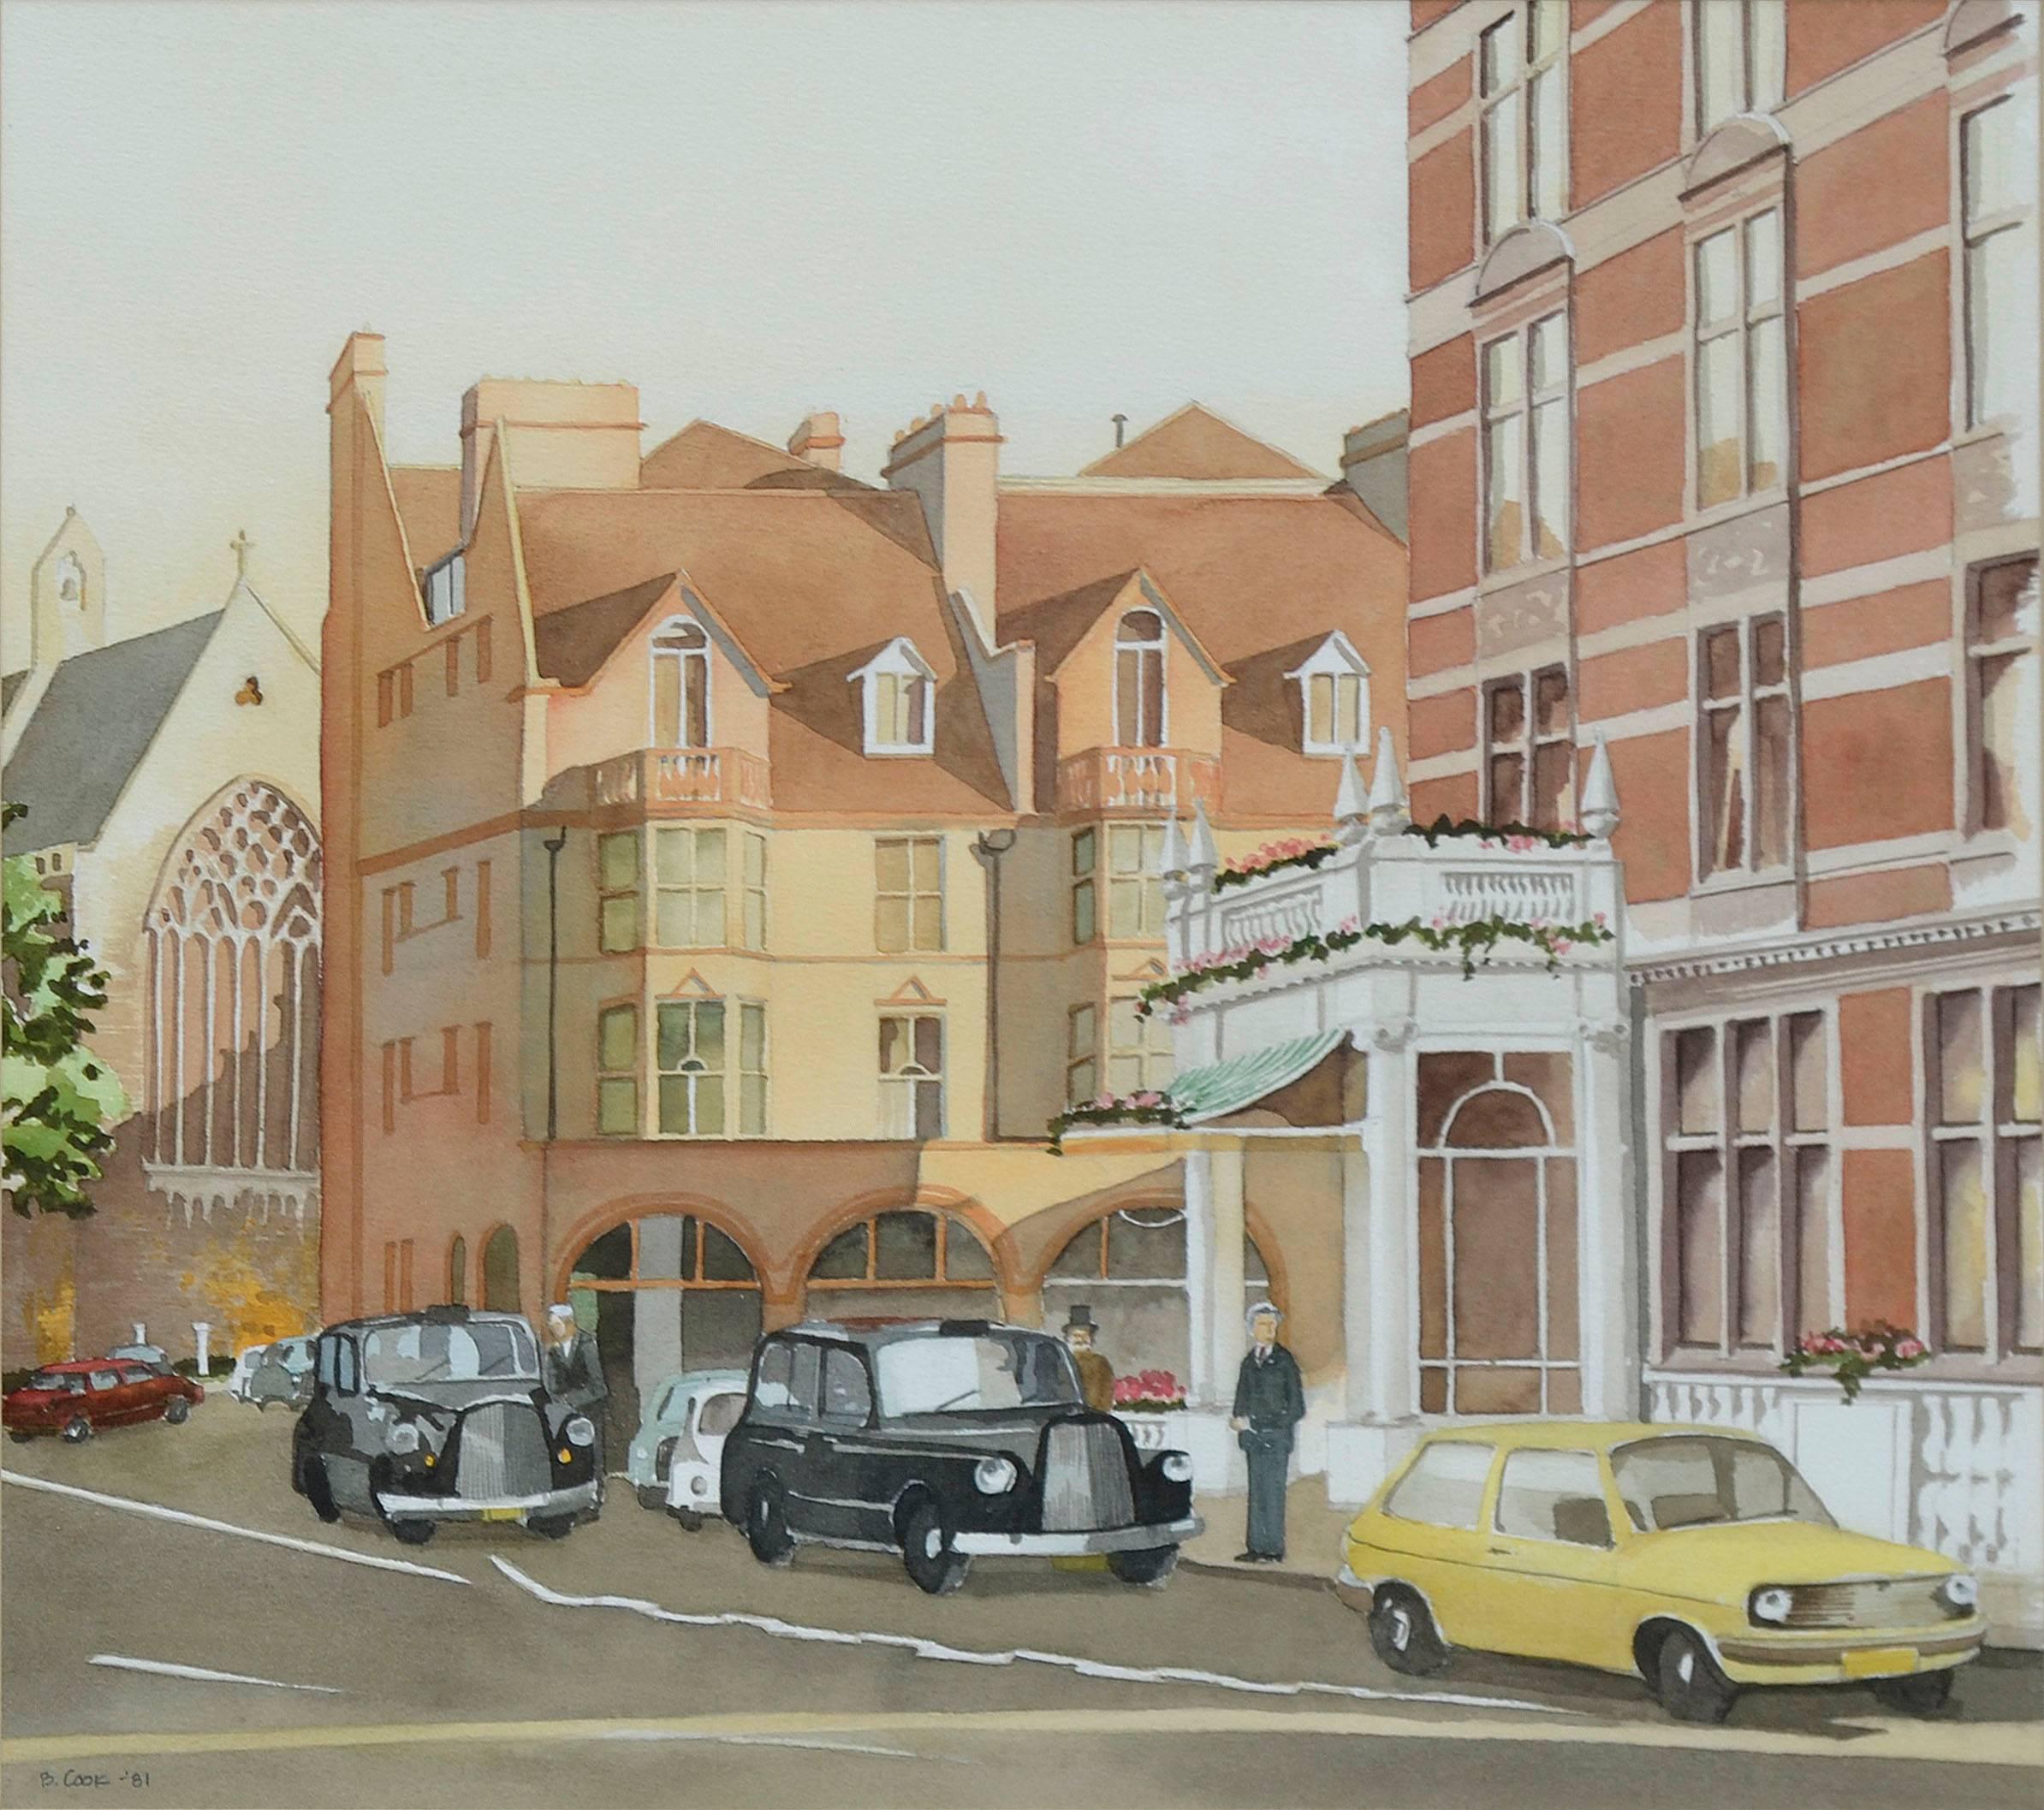 British Taxis for Hire - Figurative Urban Landscape  - Art by B Cook